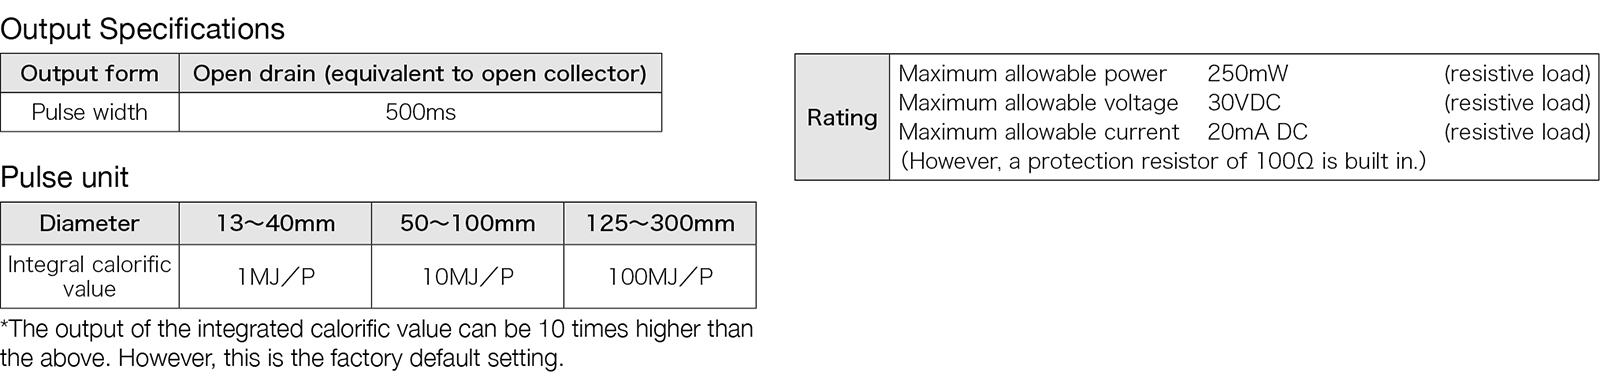 Output Specifications/Pulse unit